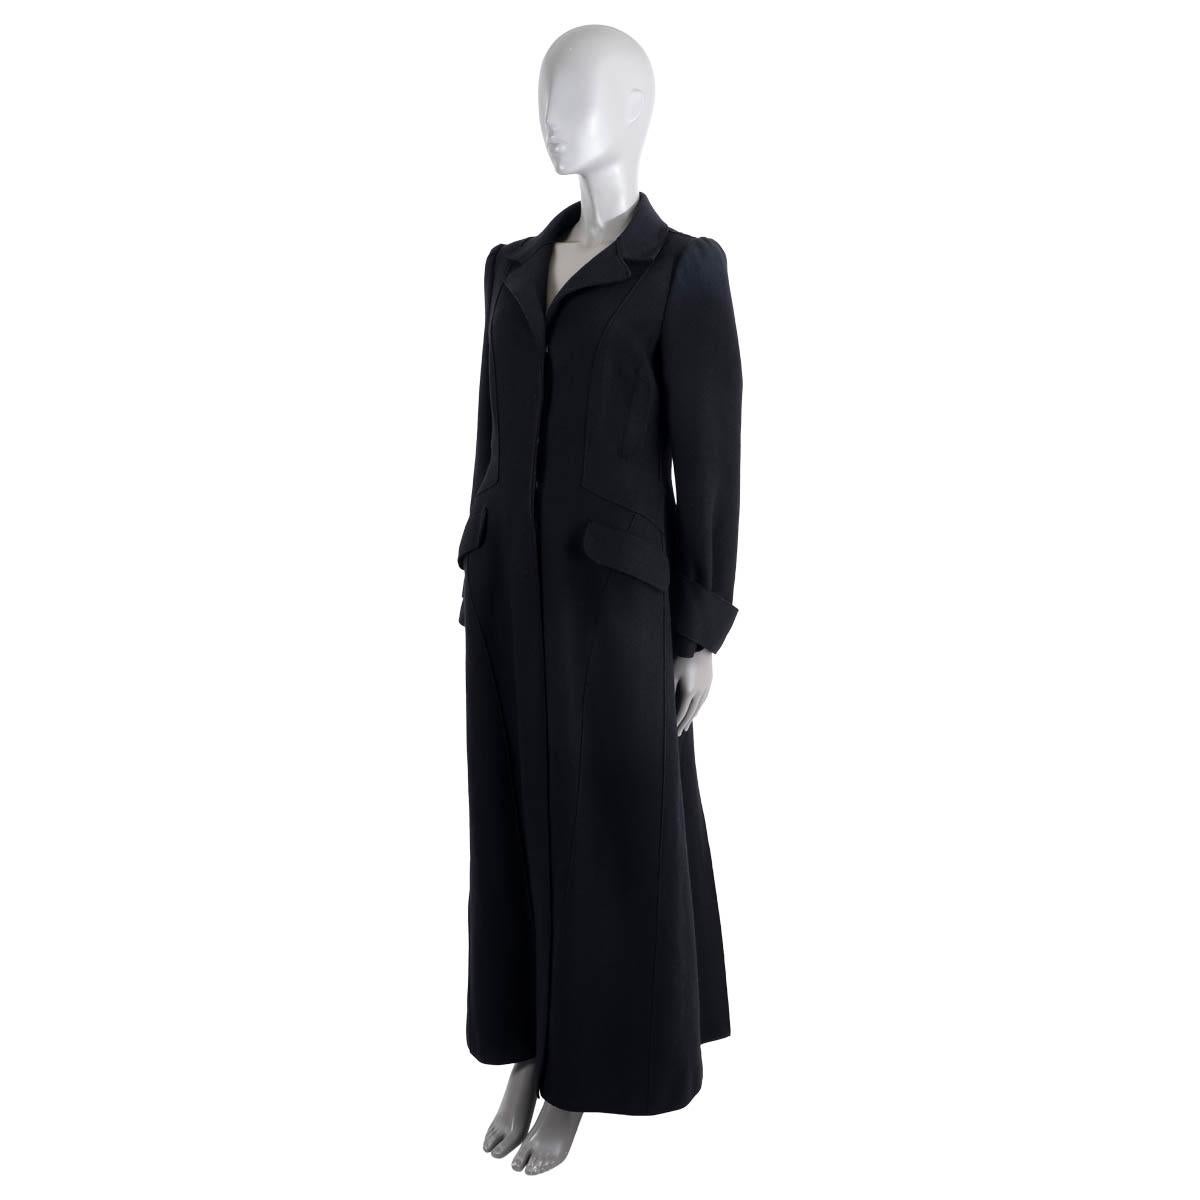 100% authentic Alberta Ferretti single-breasted maxi coat in black wool (80%) and polyamide (20%). Features notched lapels, two flap chest pockets, two flap pockets at the waist and belts around the cuffs. Closes with snap buttons on the front.